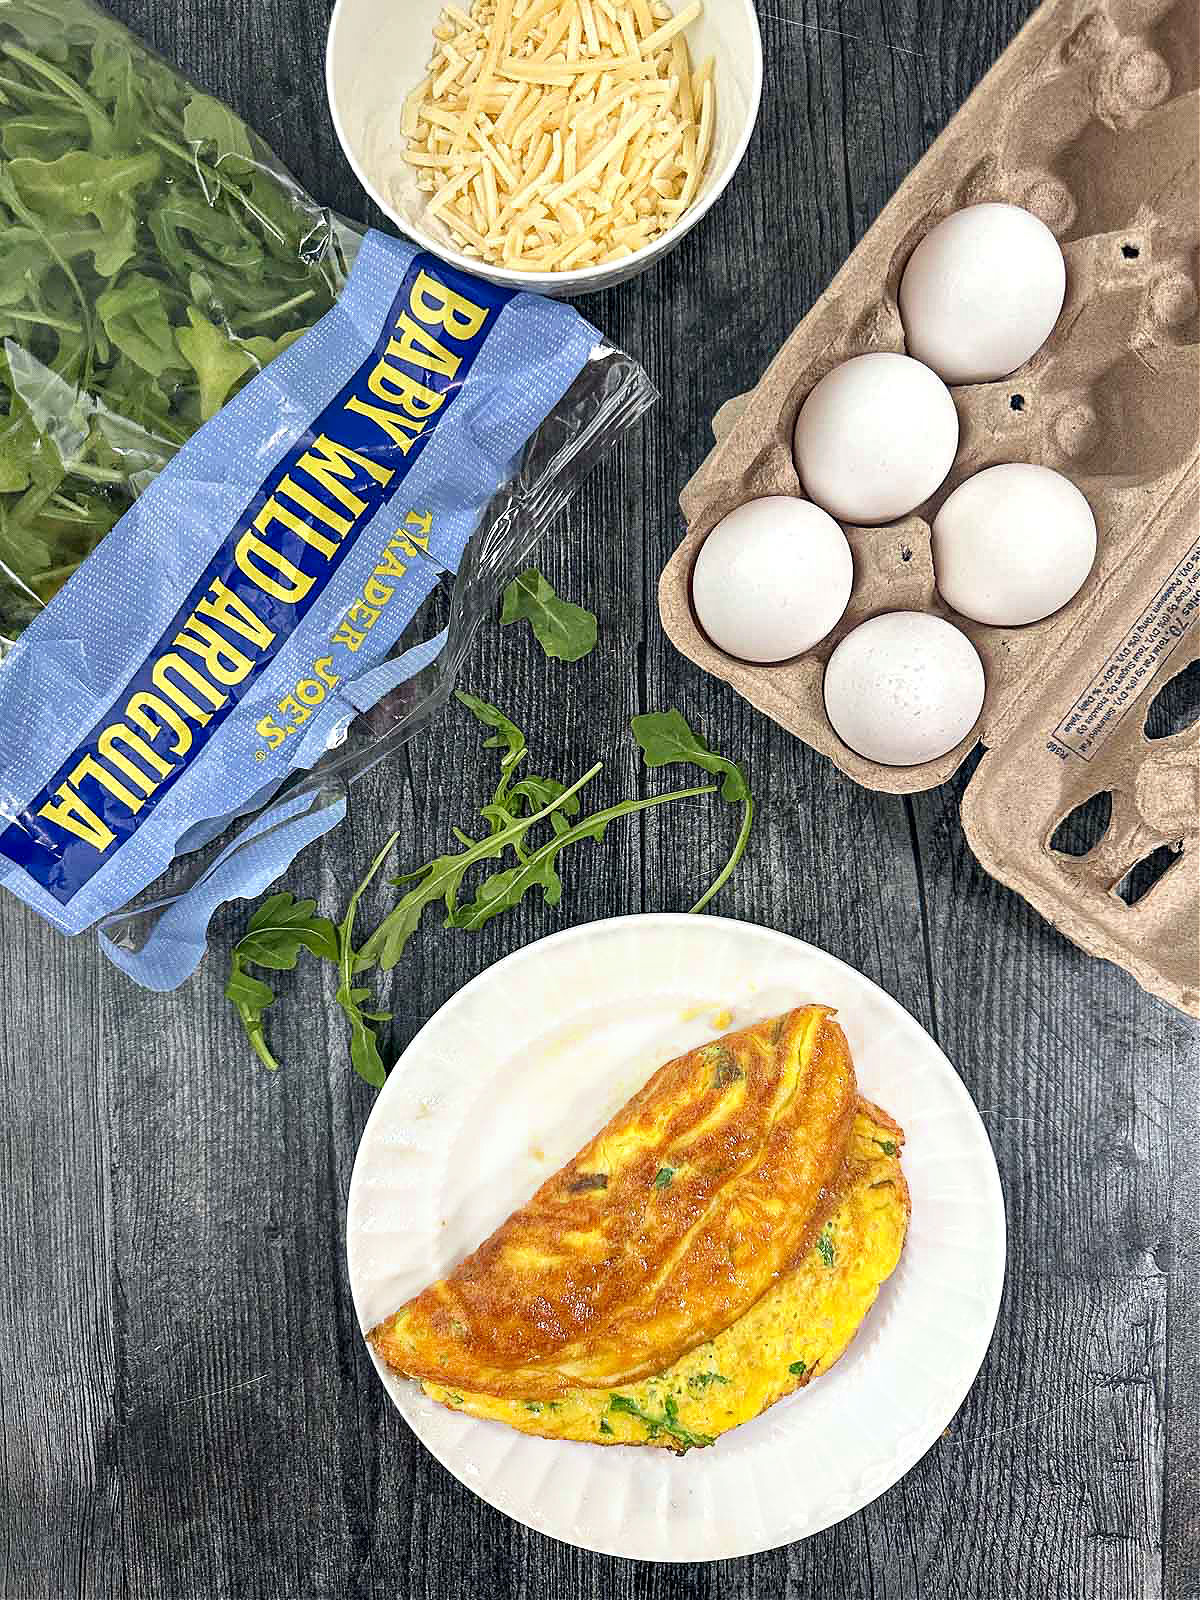 aerial view of arugula omelet on white plate with carton of eggs and a bag of arugula leaves